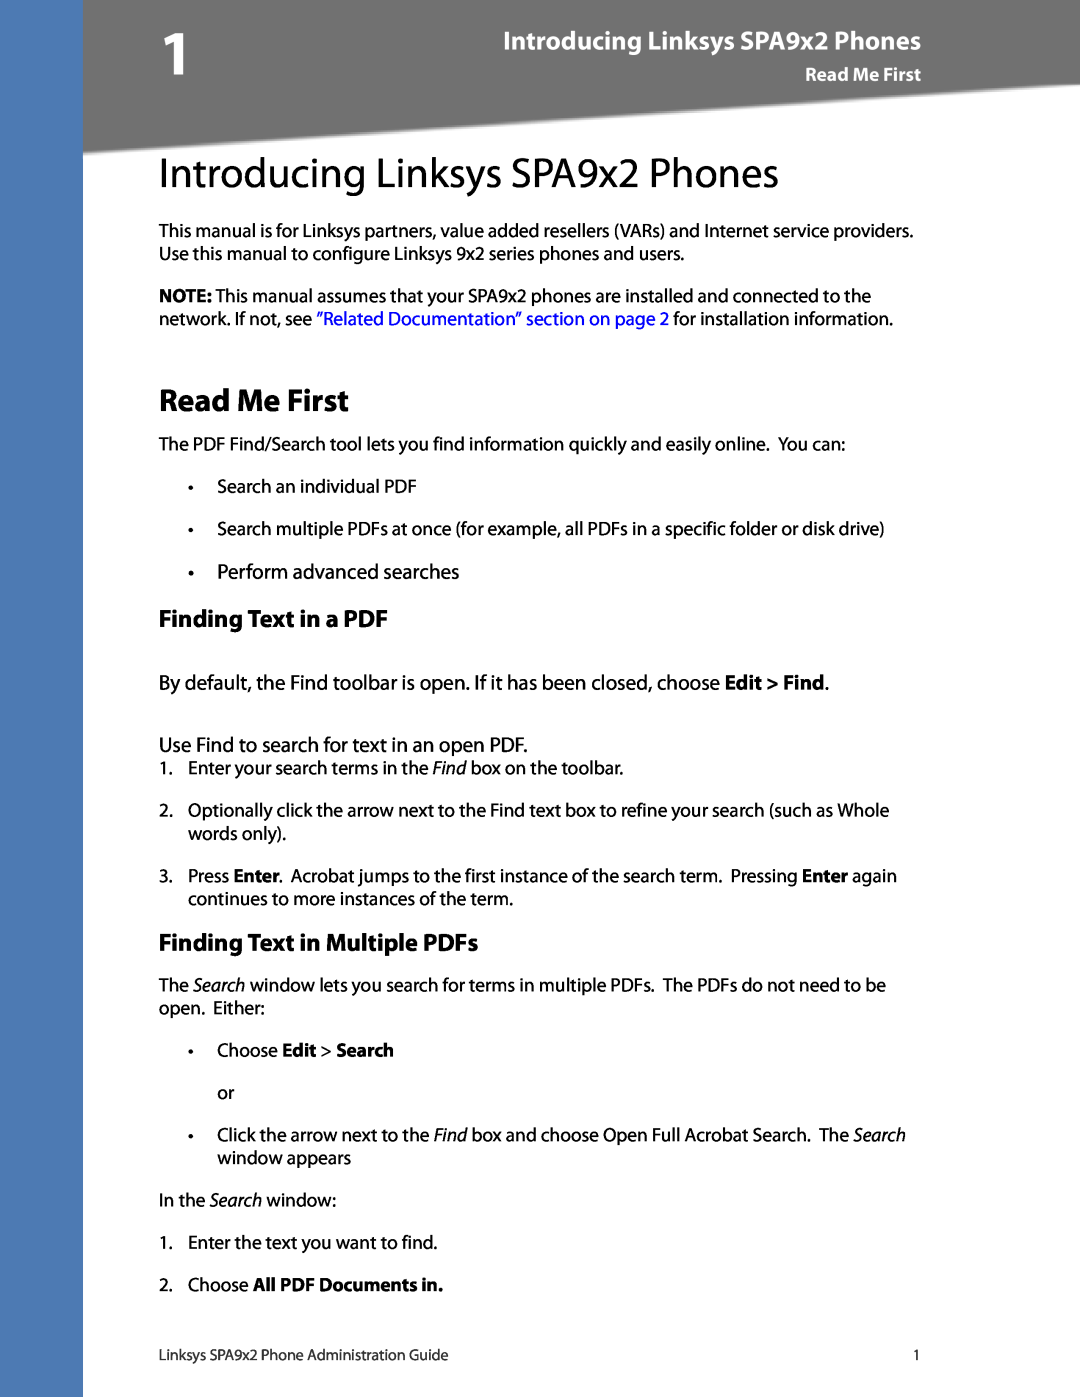 Linksys SPA962 Introducing Linksys SPA9x2 Phones, Read Me First, Finding Text in a PDF, Finding Text in Multiple PDFs 